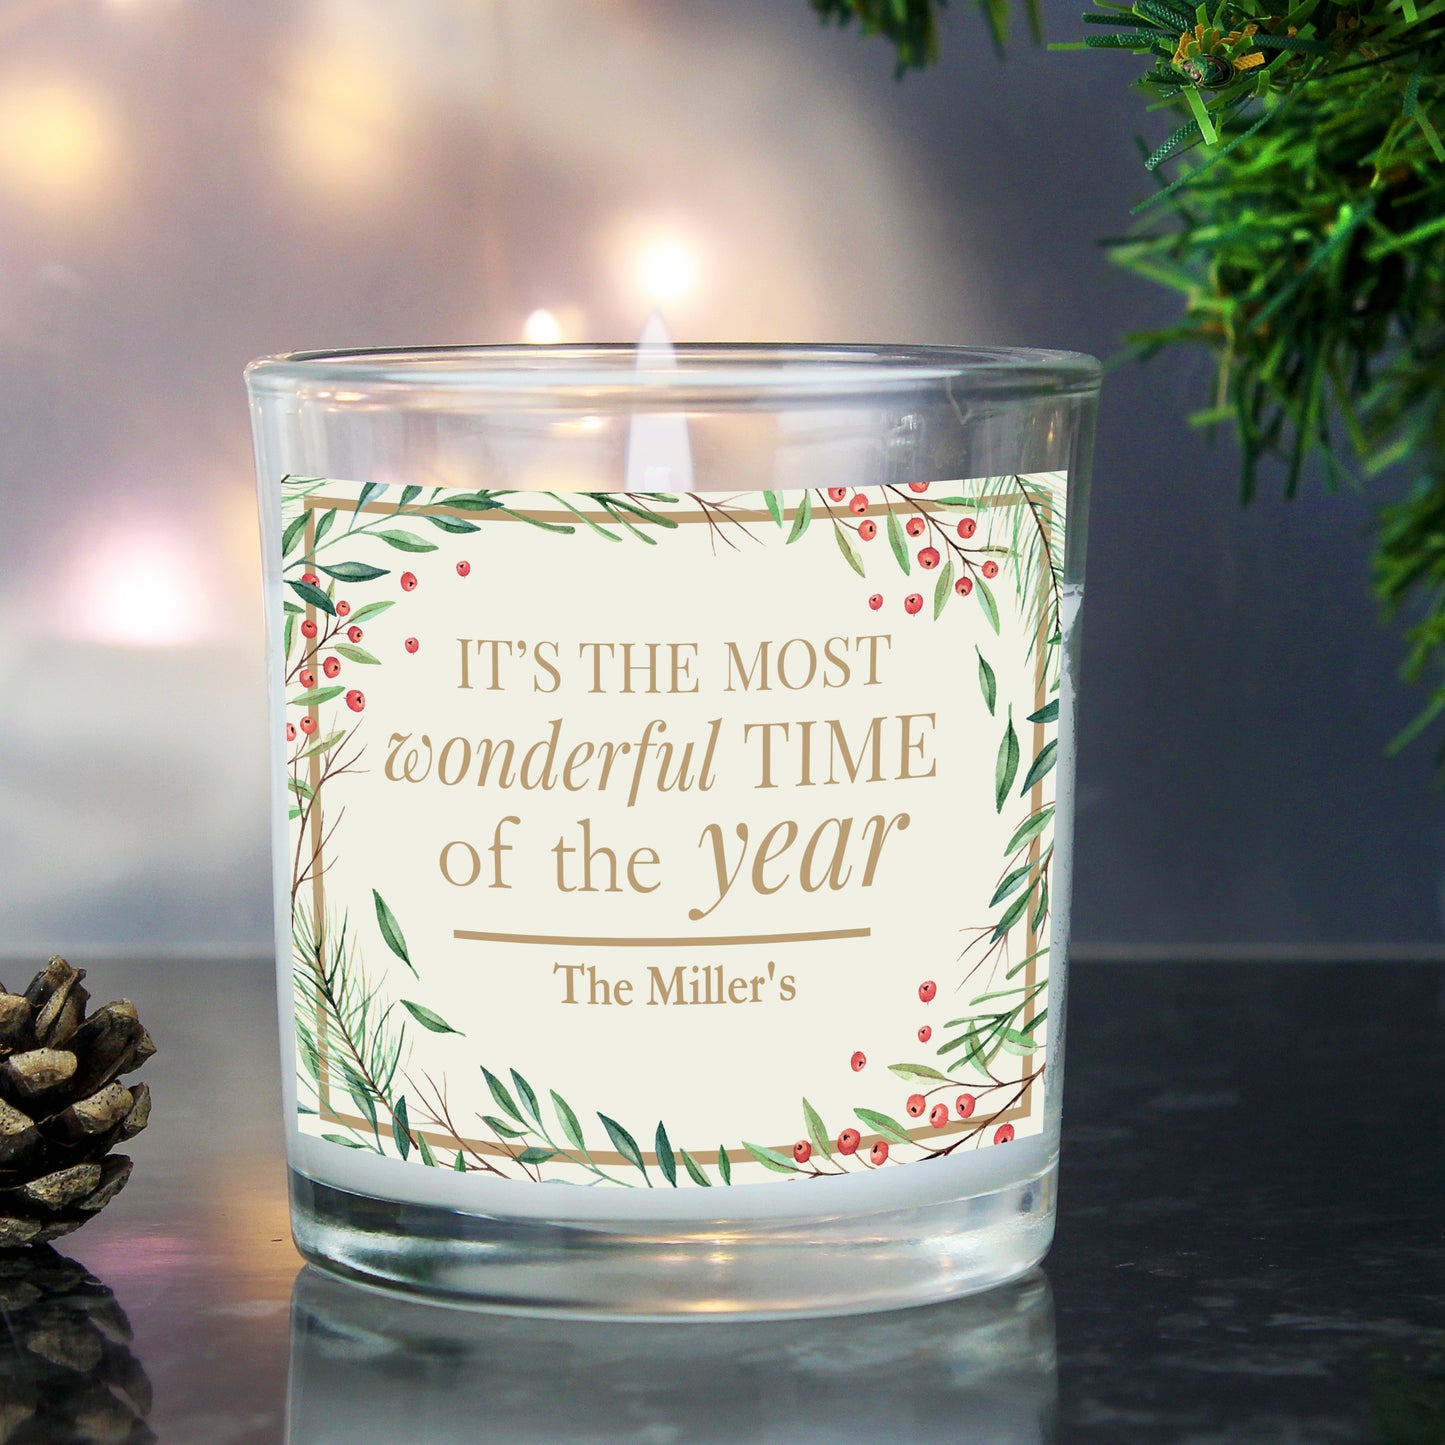 Personalised 'Wonderful Time of The Year' Christmas Scented Jar Candle - Personalise It!